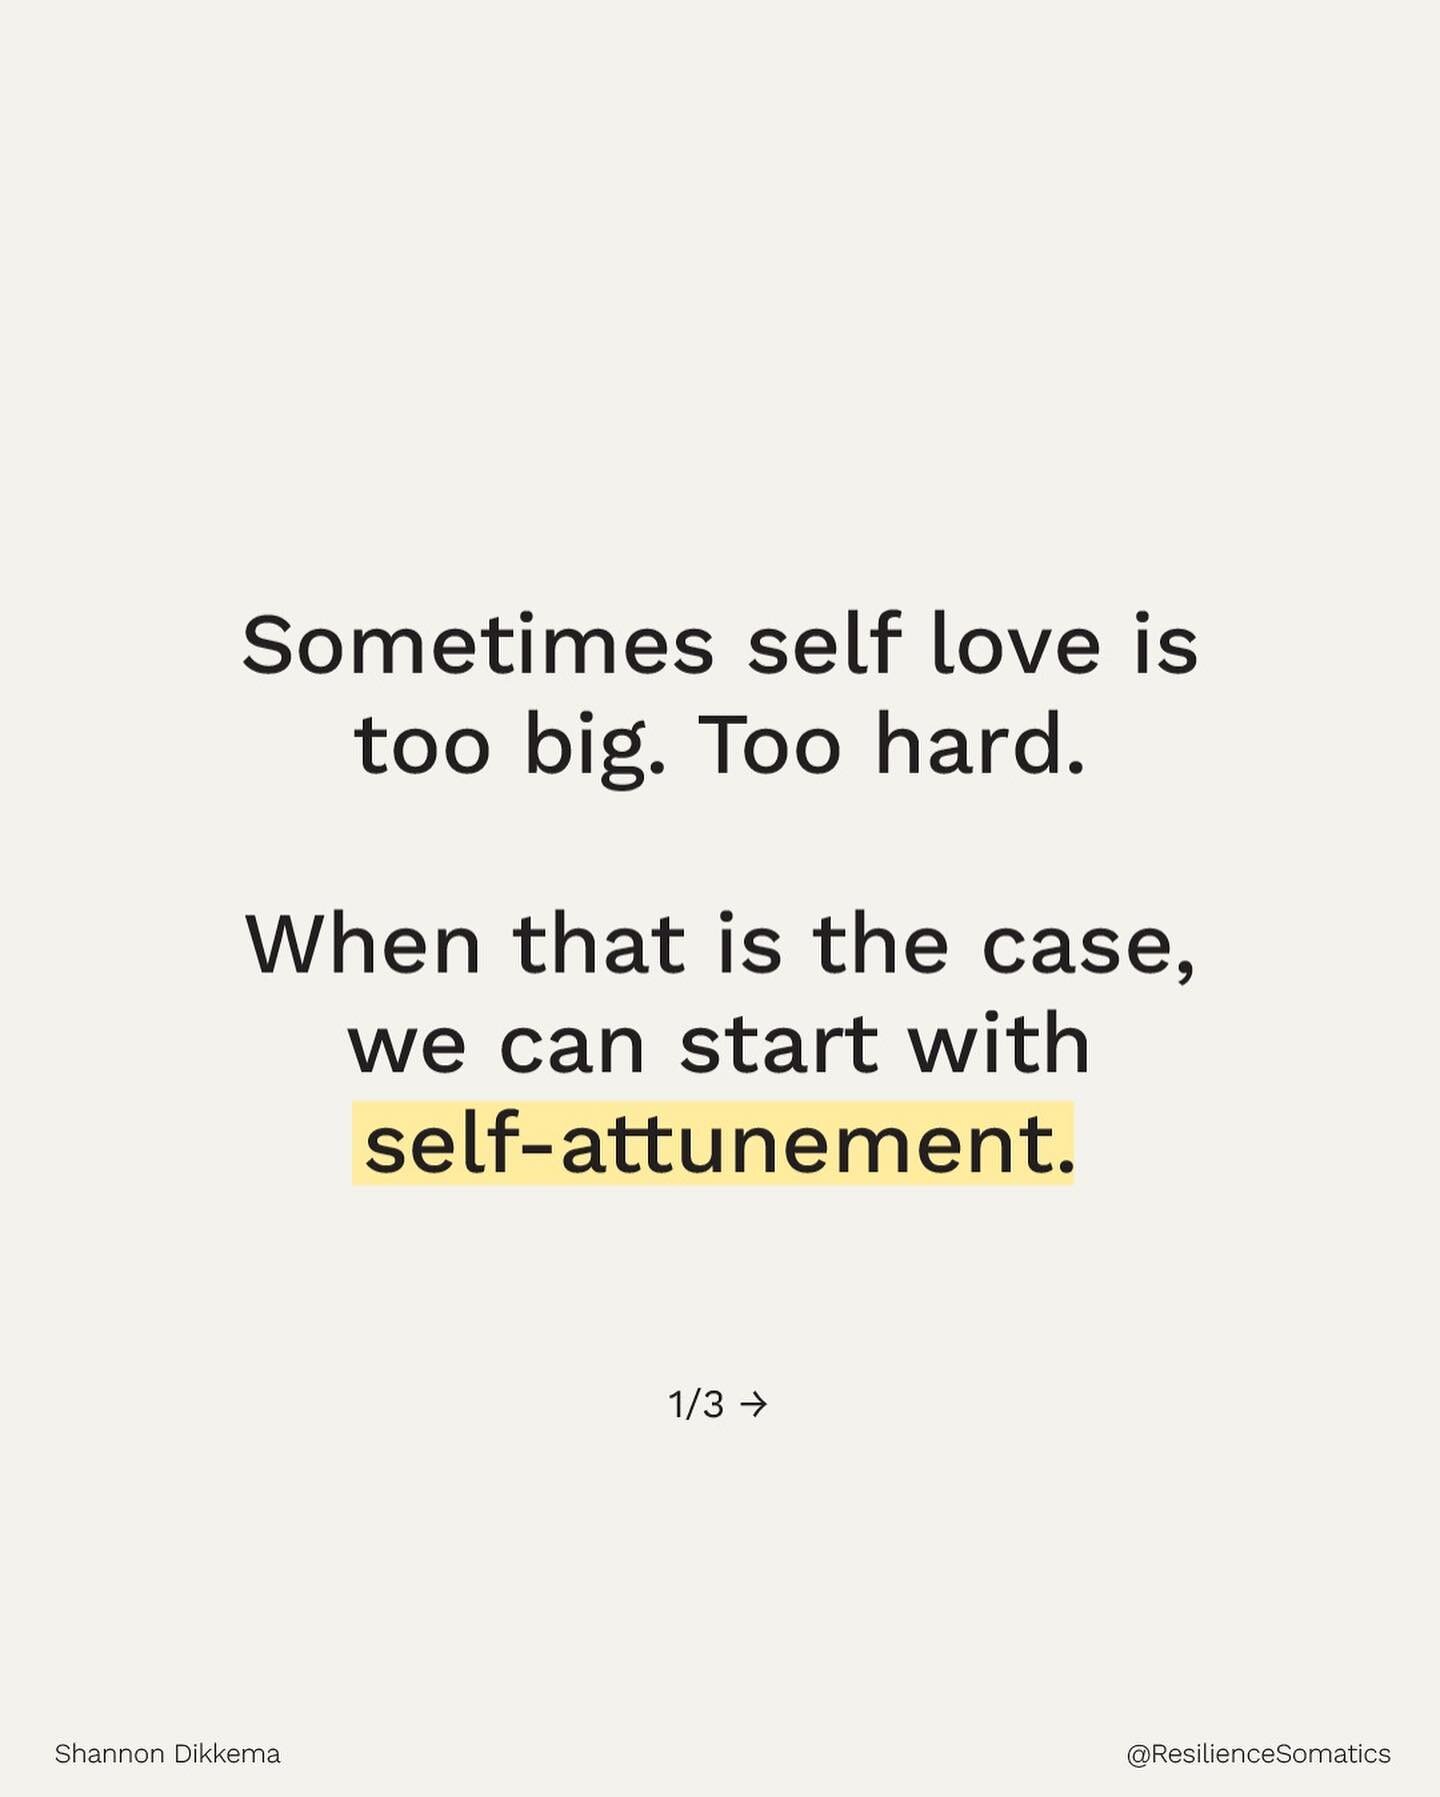 ⁠
At times, the idea of self-love can feel daunting and elusive. In these moments, self-attunement offers a gentle alternative. It's about embracing the present, accepting emotions without resistance. By acknowledging our human vulnerability, we can 